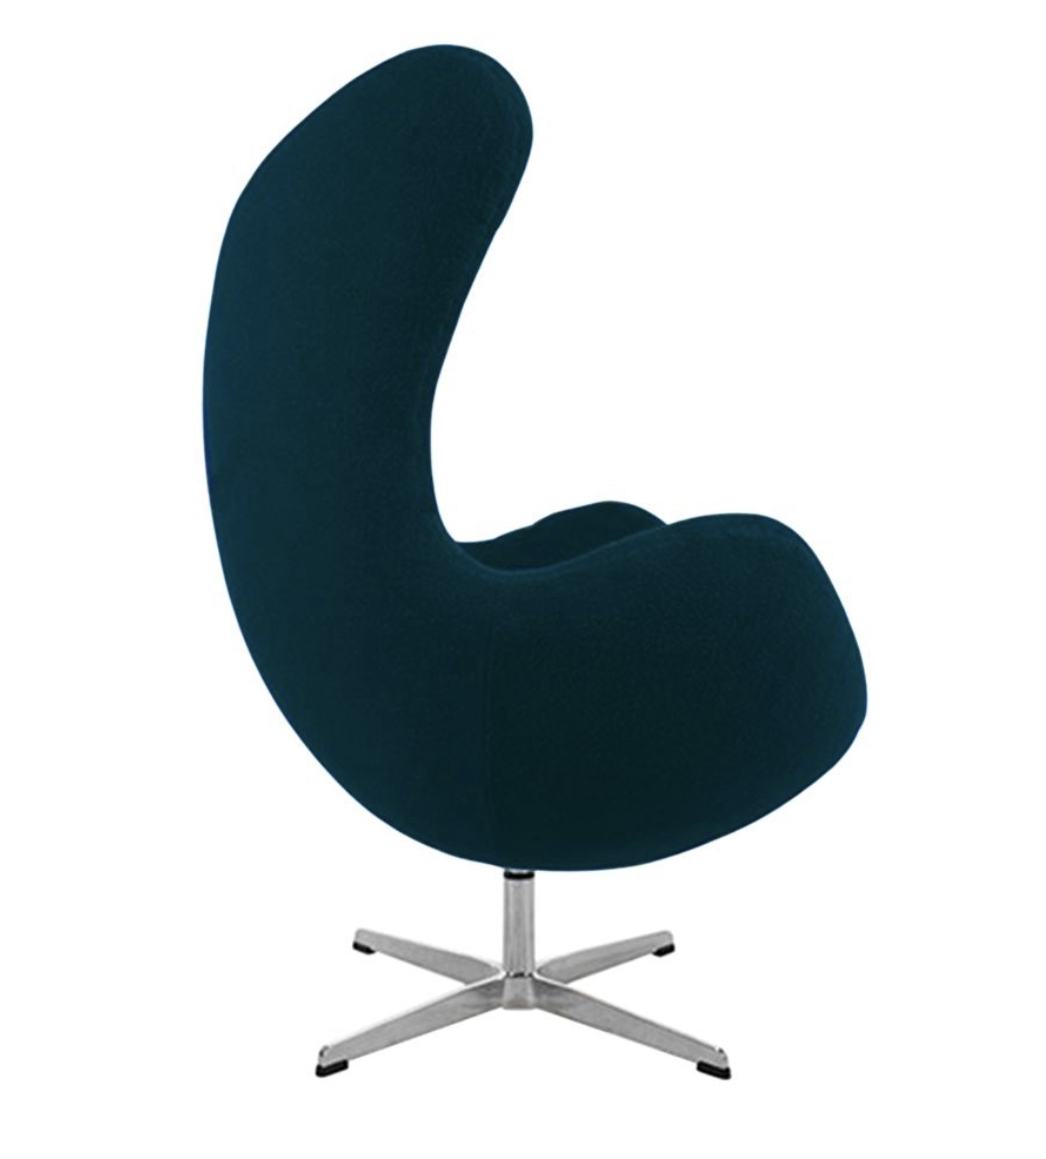 Arne Jacobsen Style Egg Chair Cashmere Teal